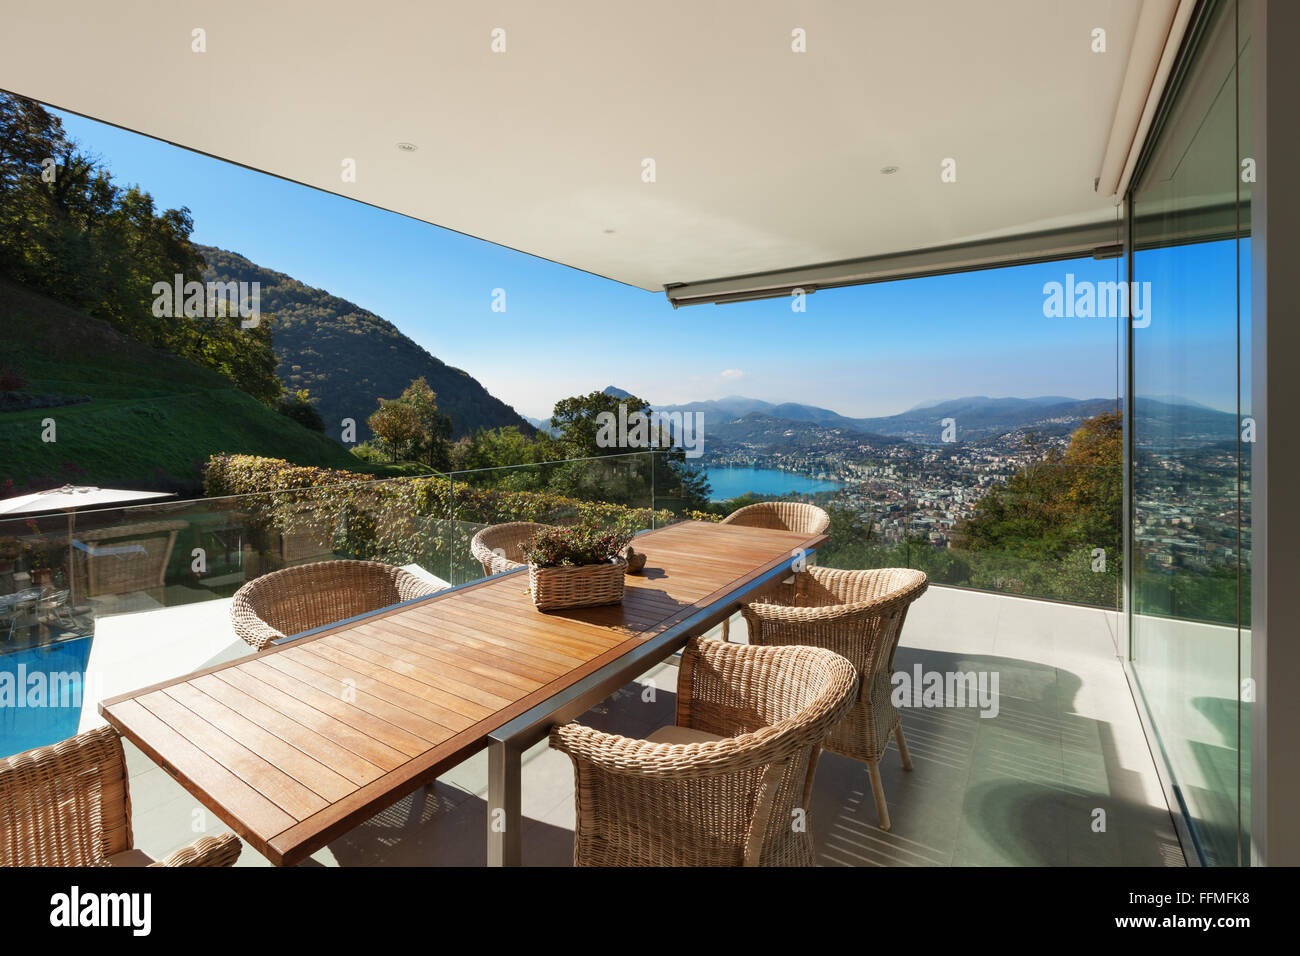 beautiful veranda with wooden table and wicker chairs,  panoramic view Stock Photo